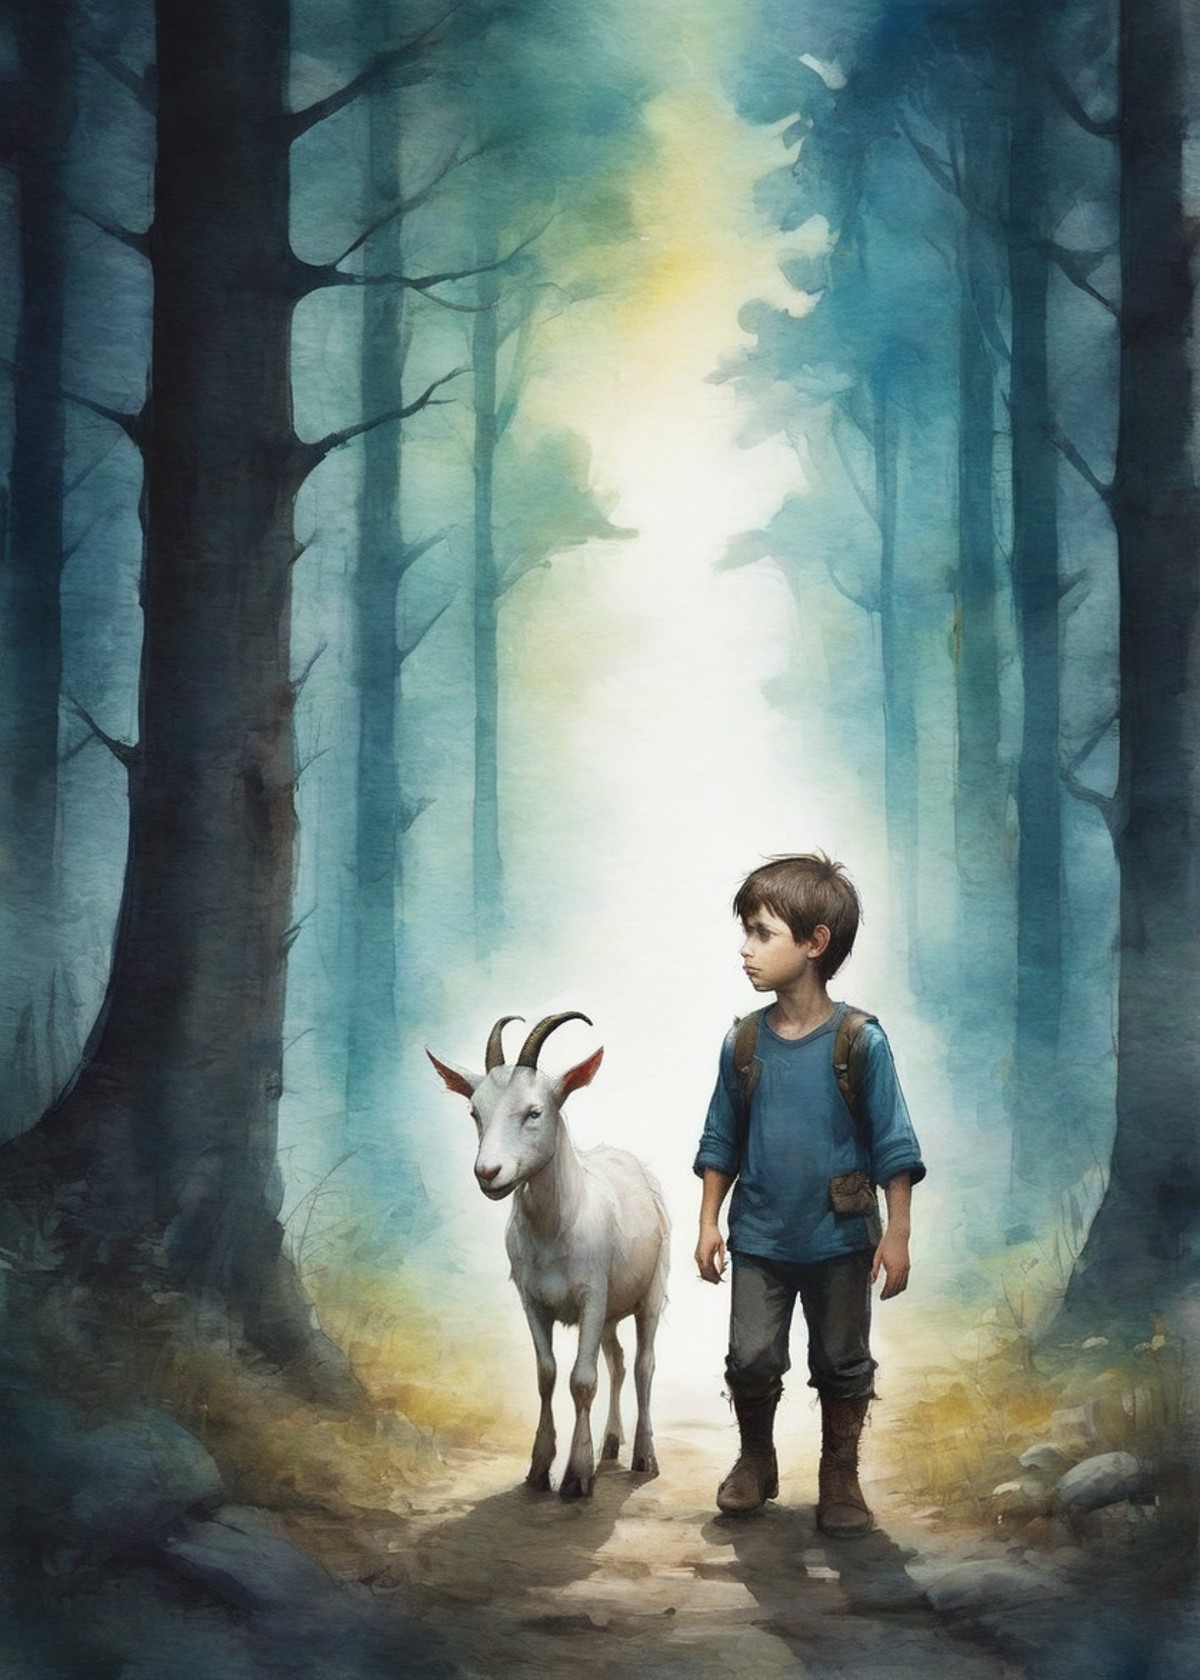 a small boy and his goat travel through a luminous fantasy forest deep ominous trail hidden watchful eyes